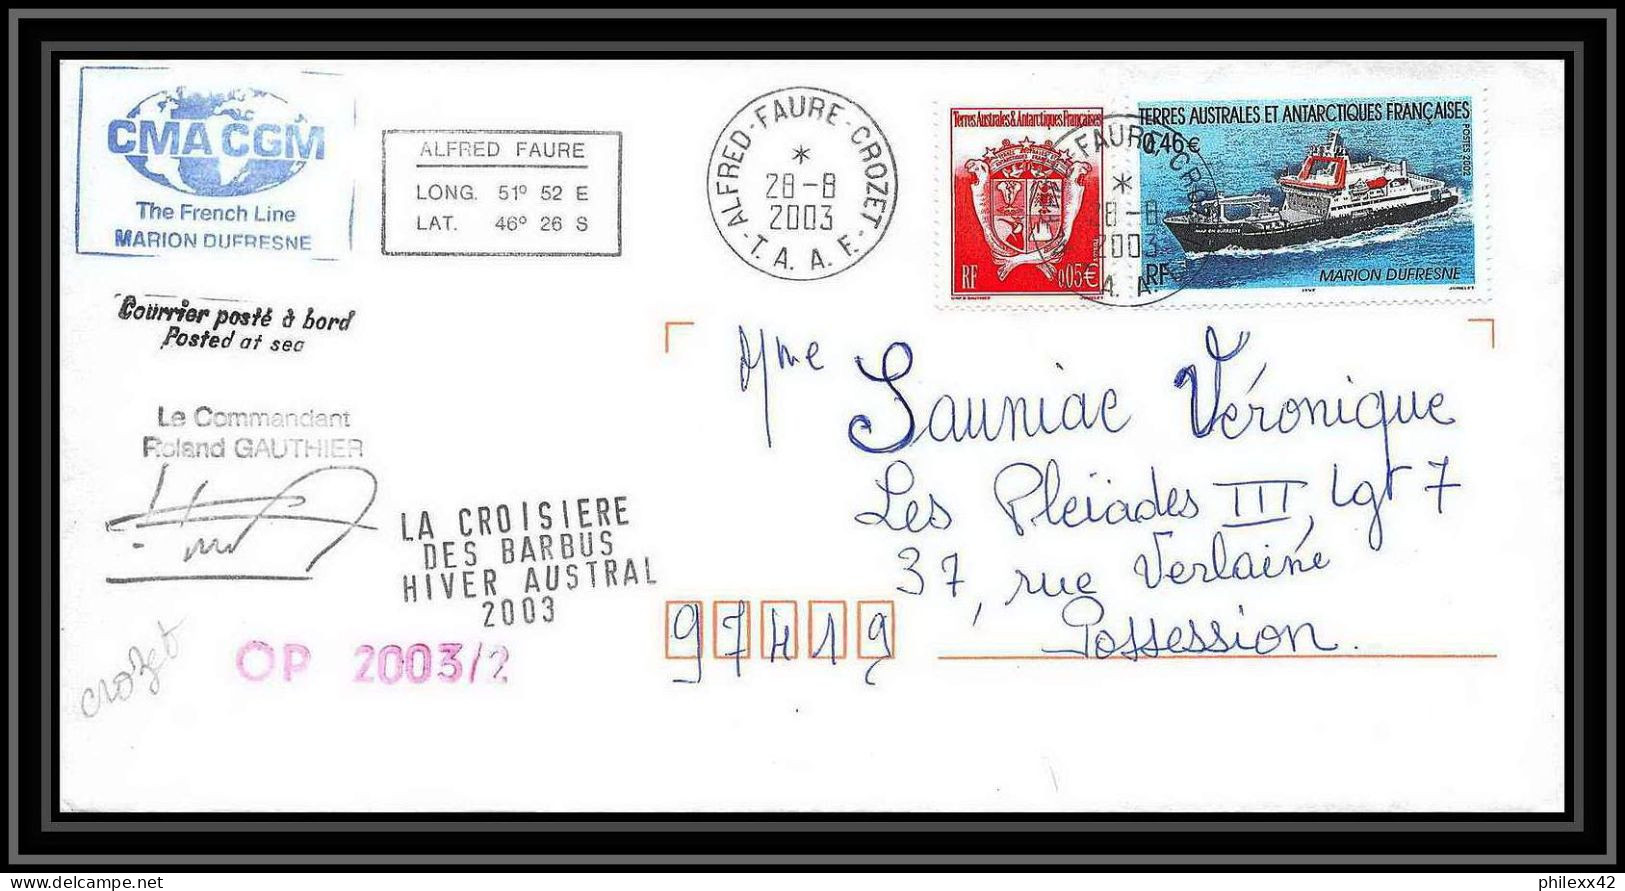 2400 Dufresne 2 Op 2003/2 Crozet 28/8/2003 Signé Signed ANTARCTIC Terres Australes (taaf) Lettre Cover - Covers & Documents